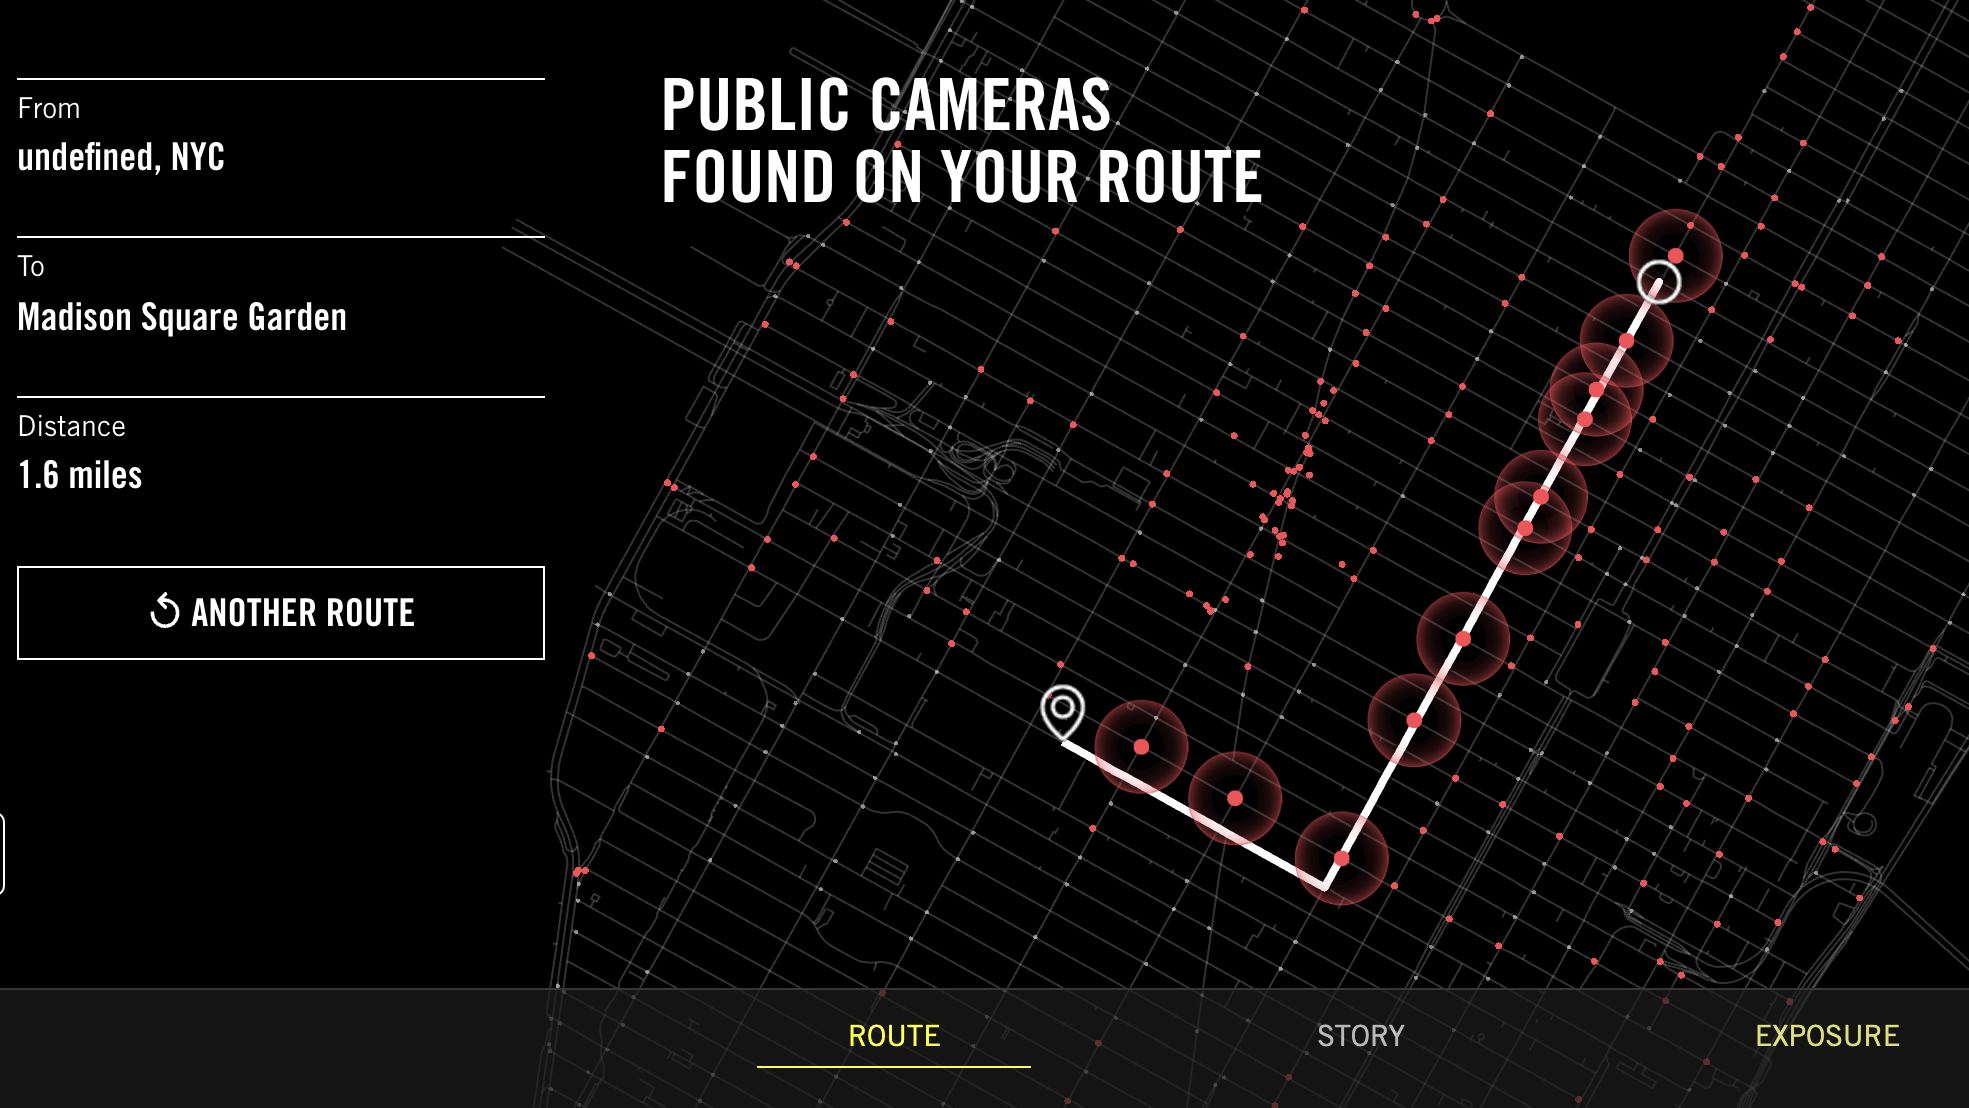 Here’s the Oppressive Surveillance You’ll Face If You Protest in NYC